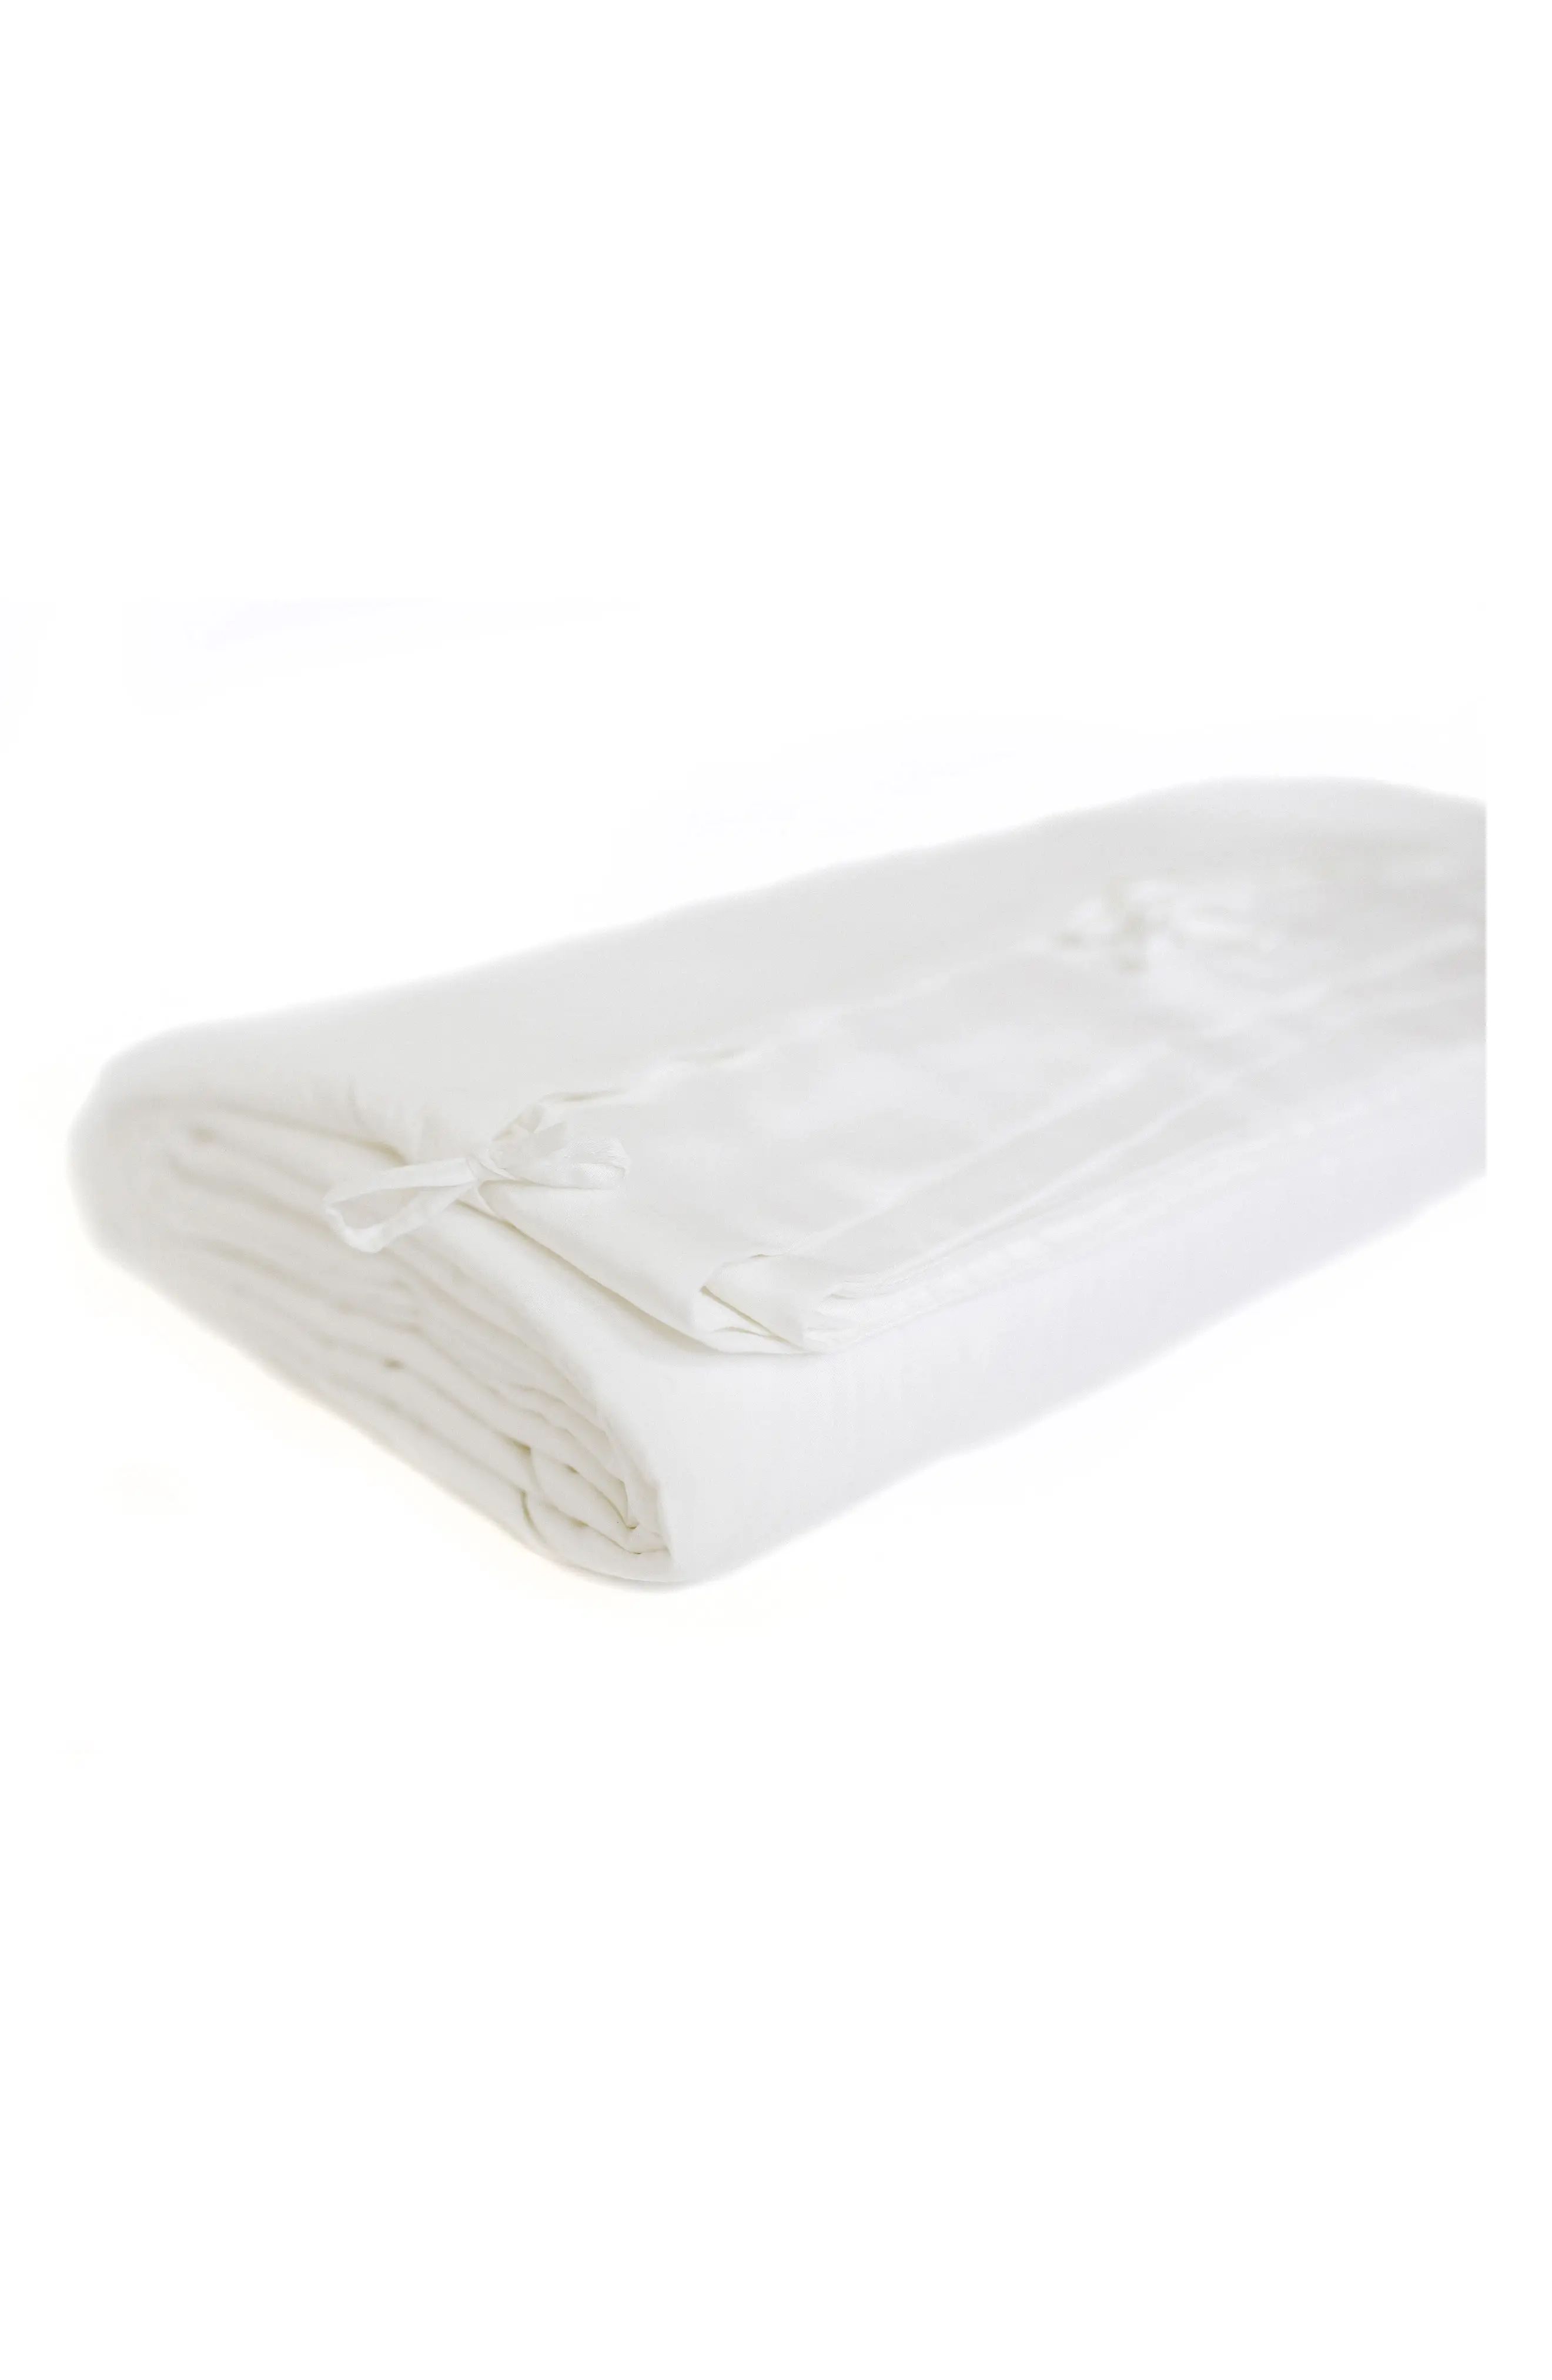 Cozy Earth Viscose From Bamboo Duvet Cover - Twin at Nordstrom Rack | Nordstrom Rack